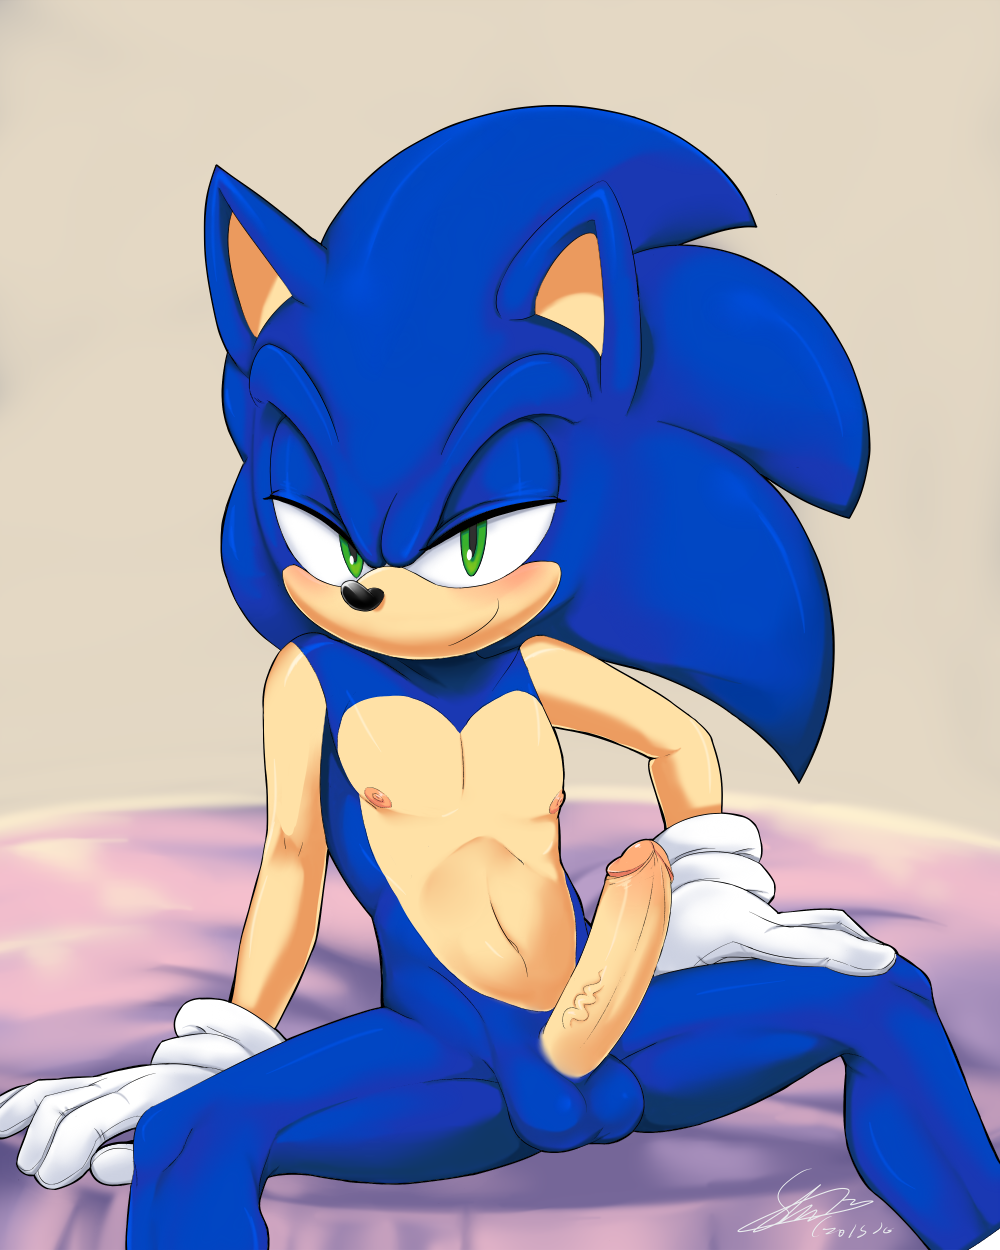 Naked sonic the hedgehog